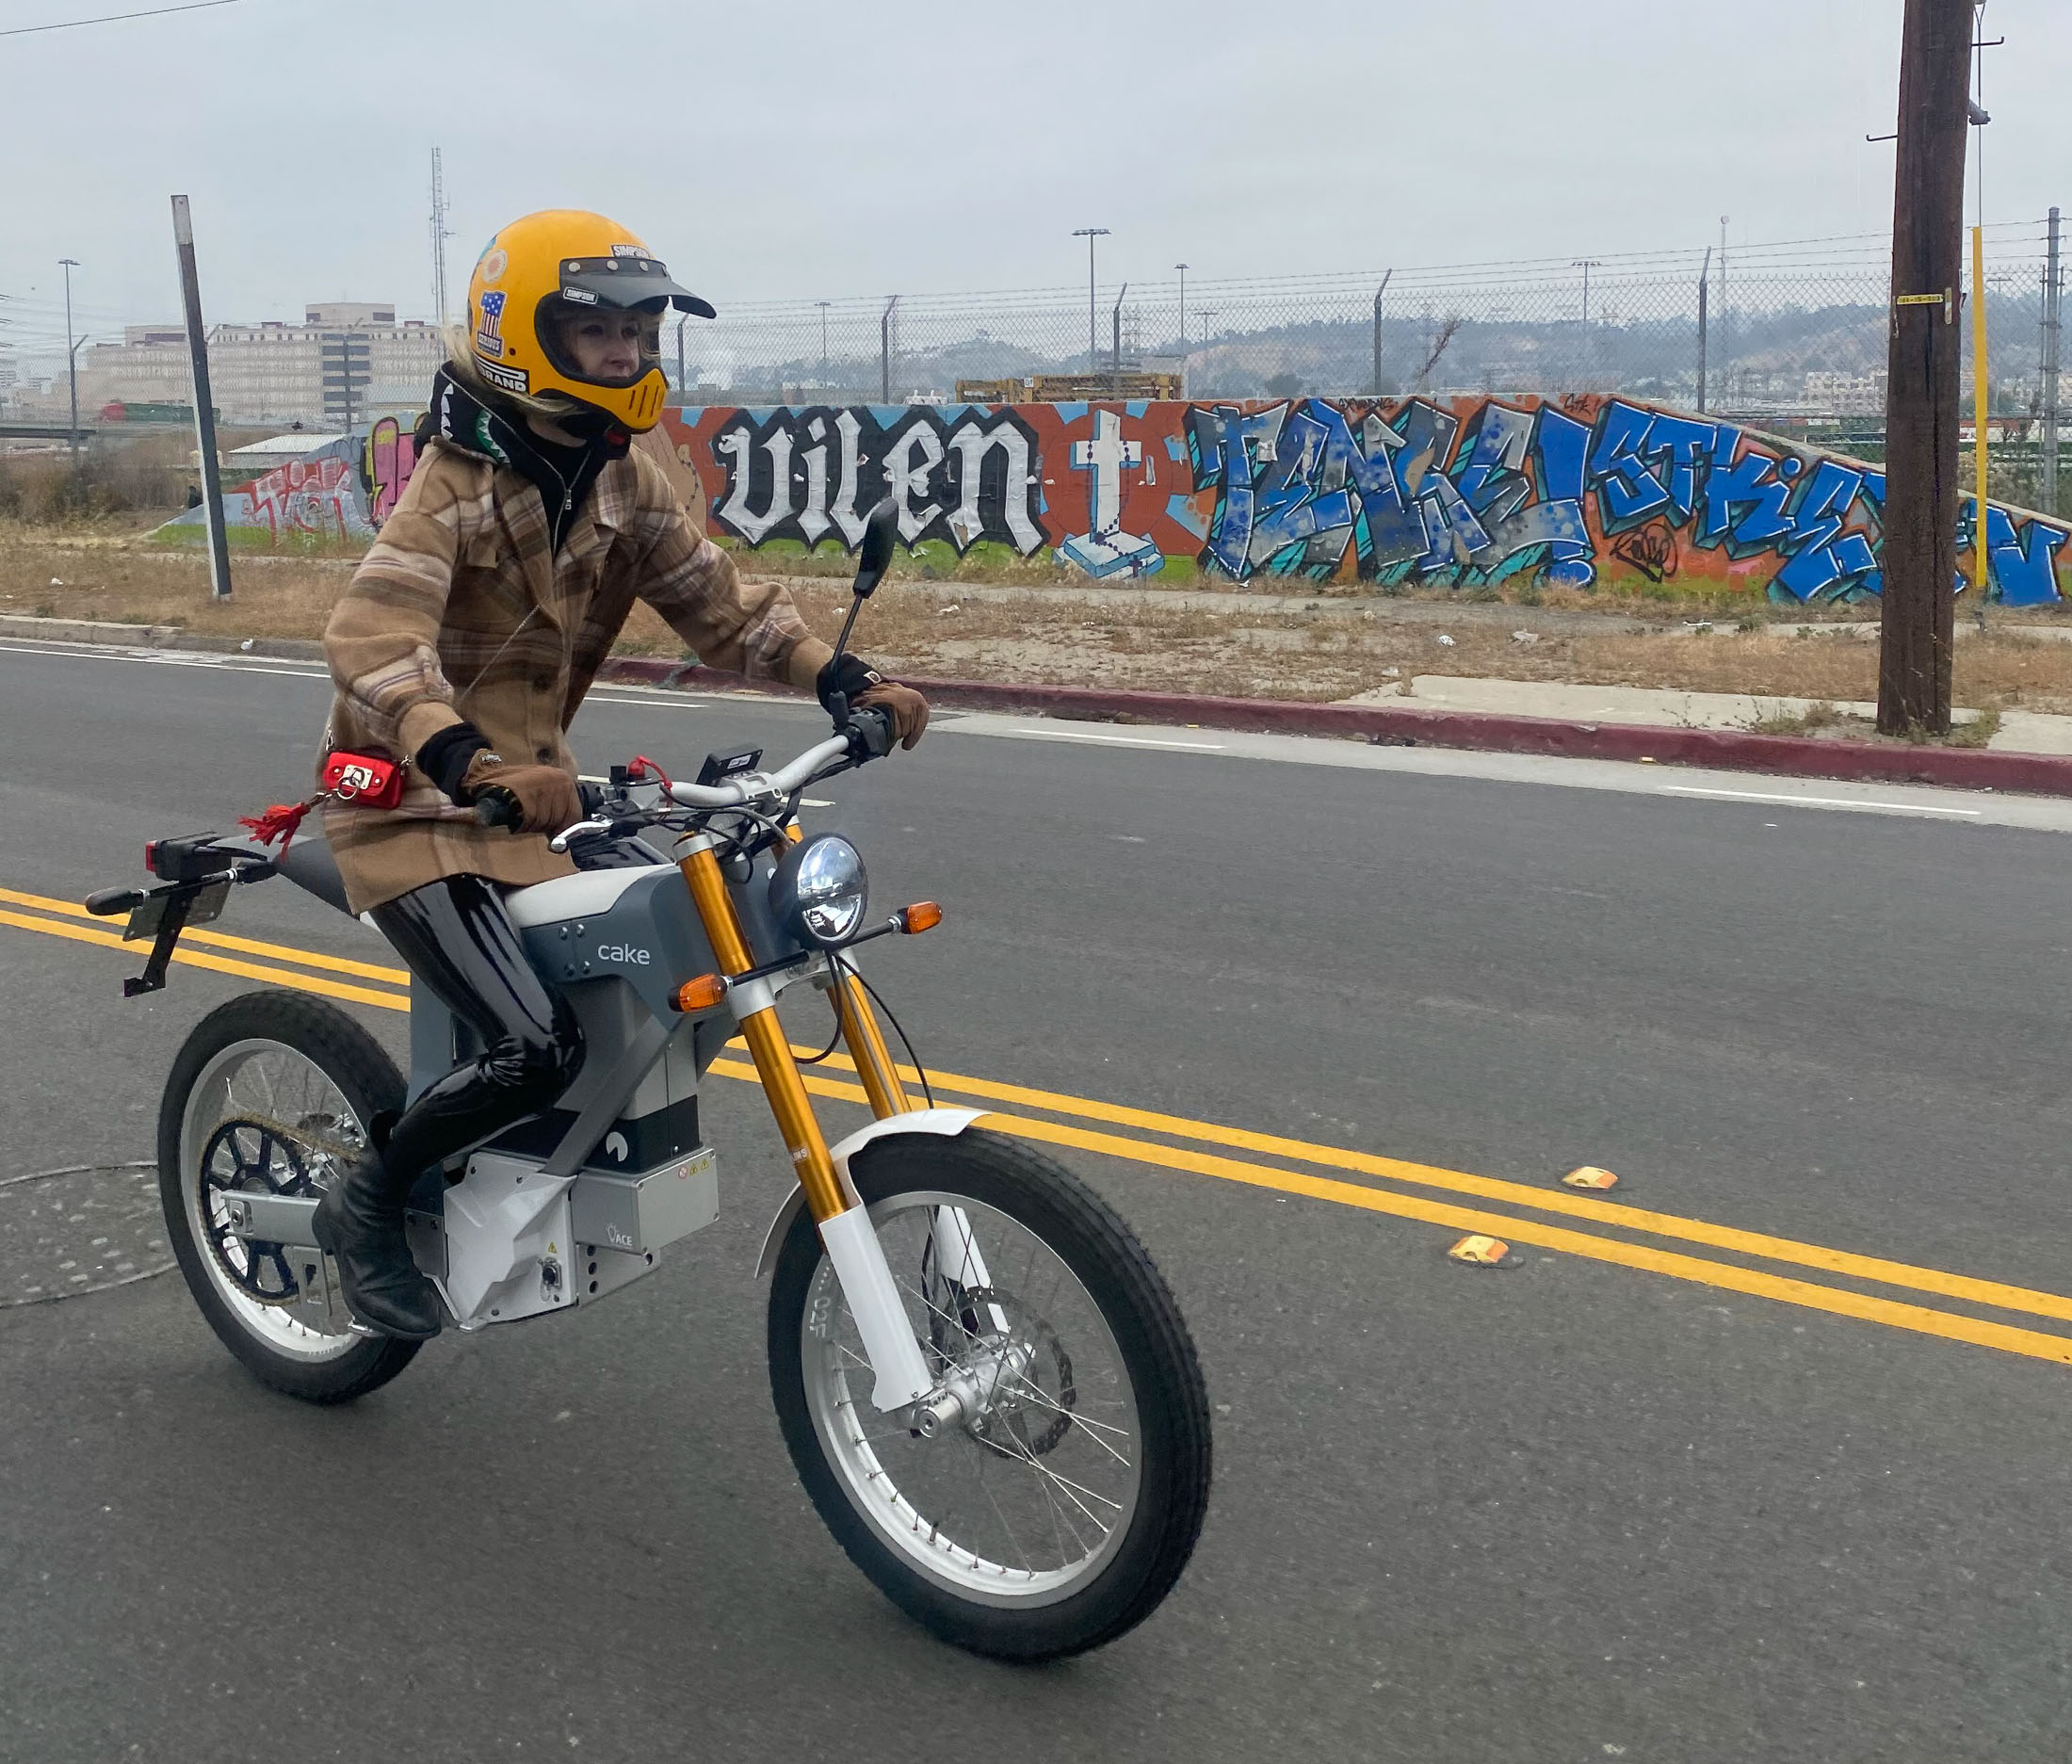 relates to Back to the Bike Lane: The Cake Electric Motorcycle Just Isn’t It